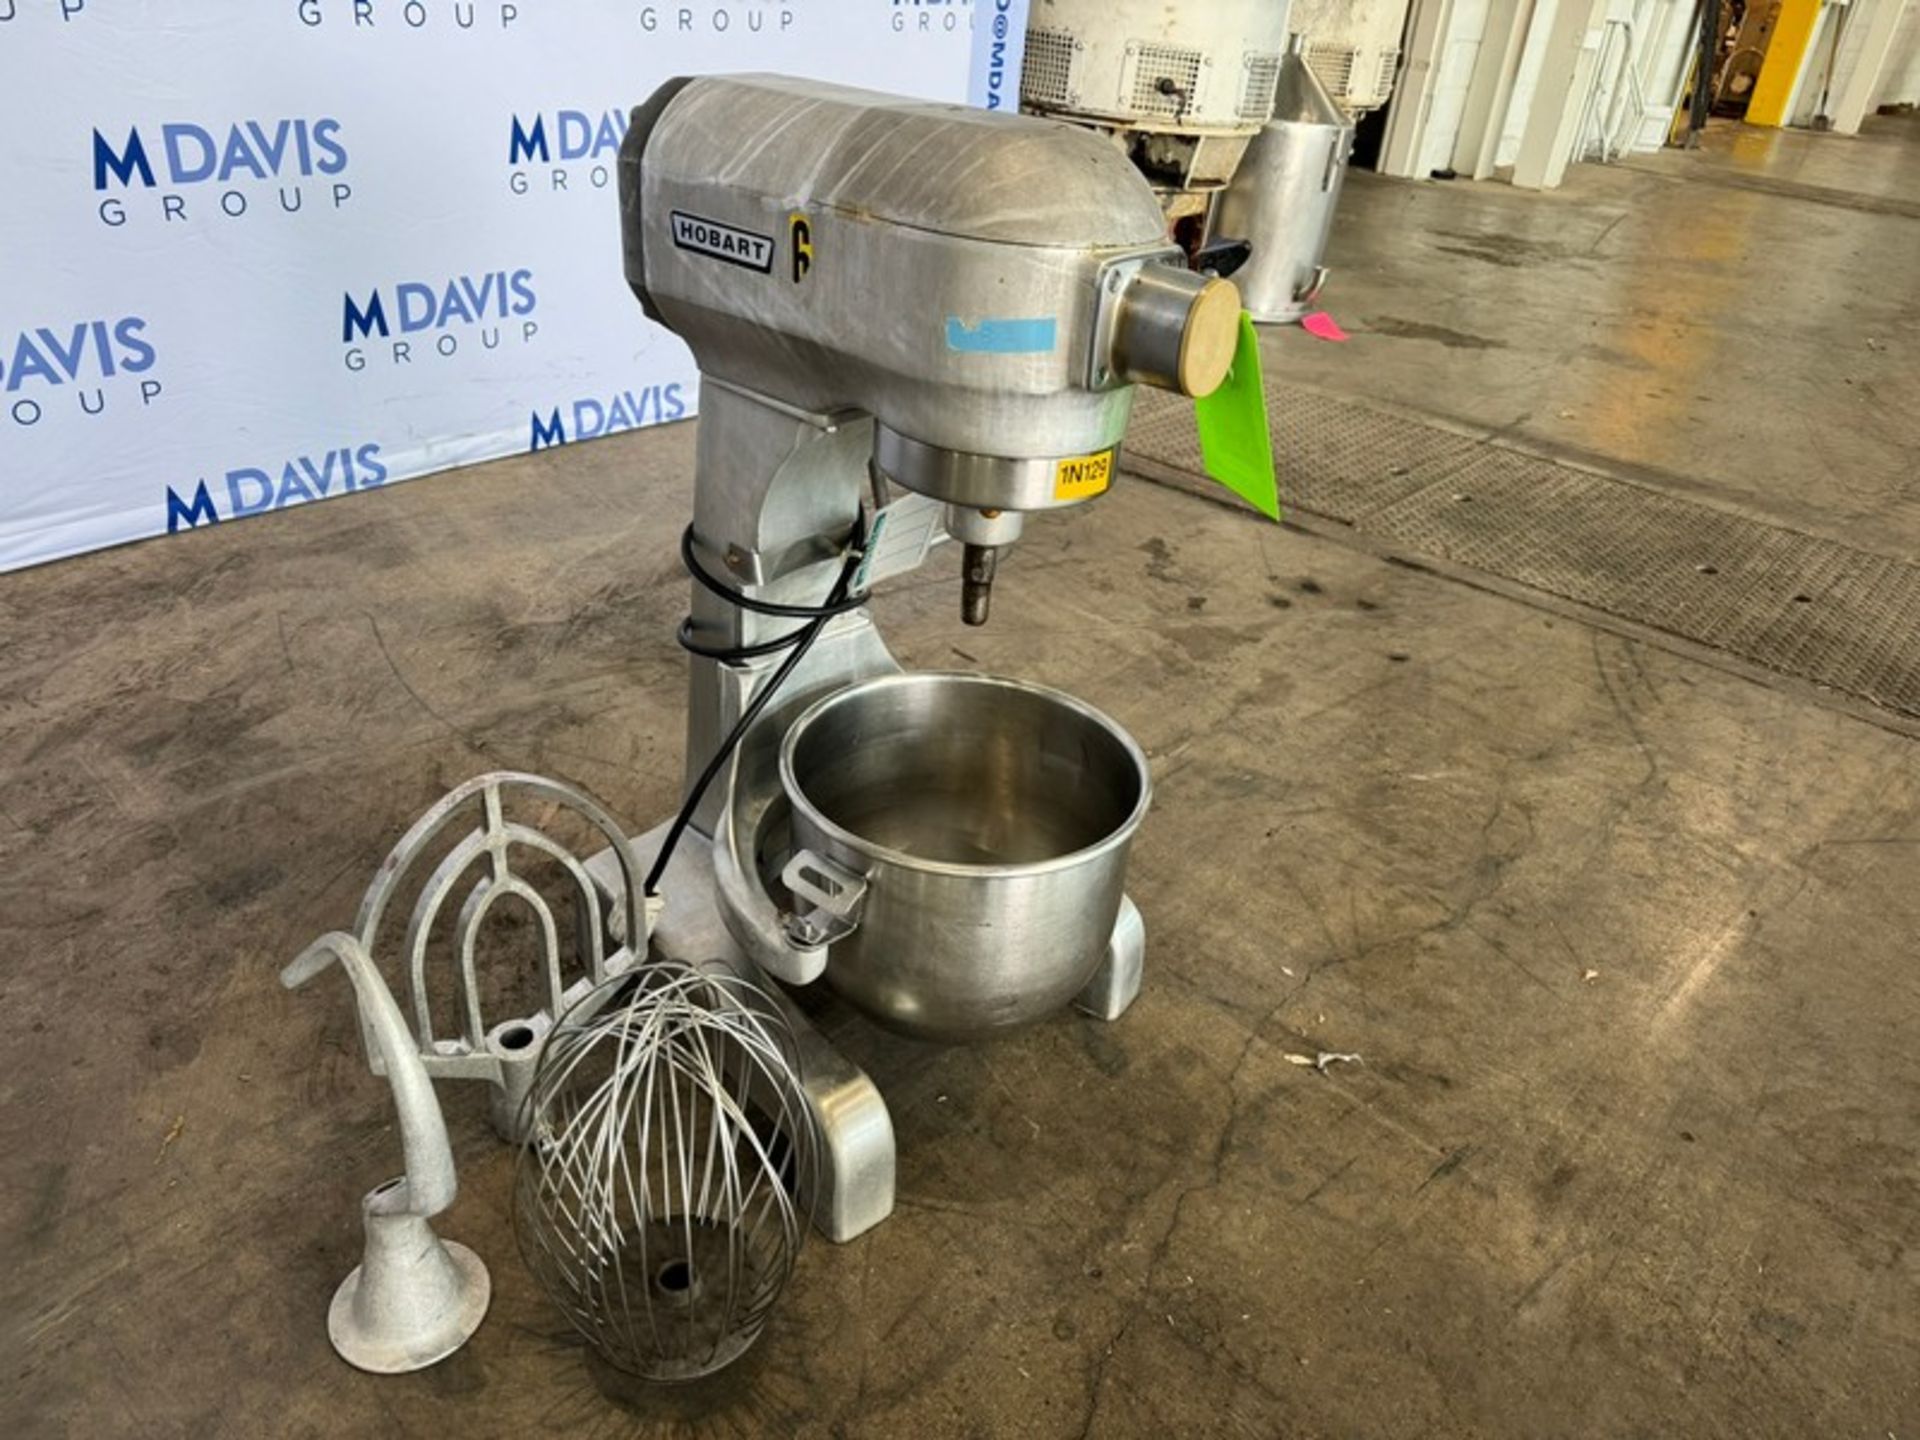 Hobart Mixer, M/N A-200DT, S/N 11-413-046, 115 Volts, 1725 RPM, with S/S Mixing Bowl, Whip, & - Image 2 of 6